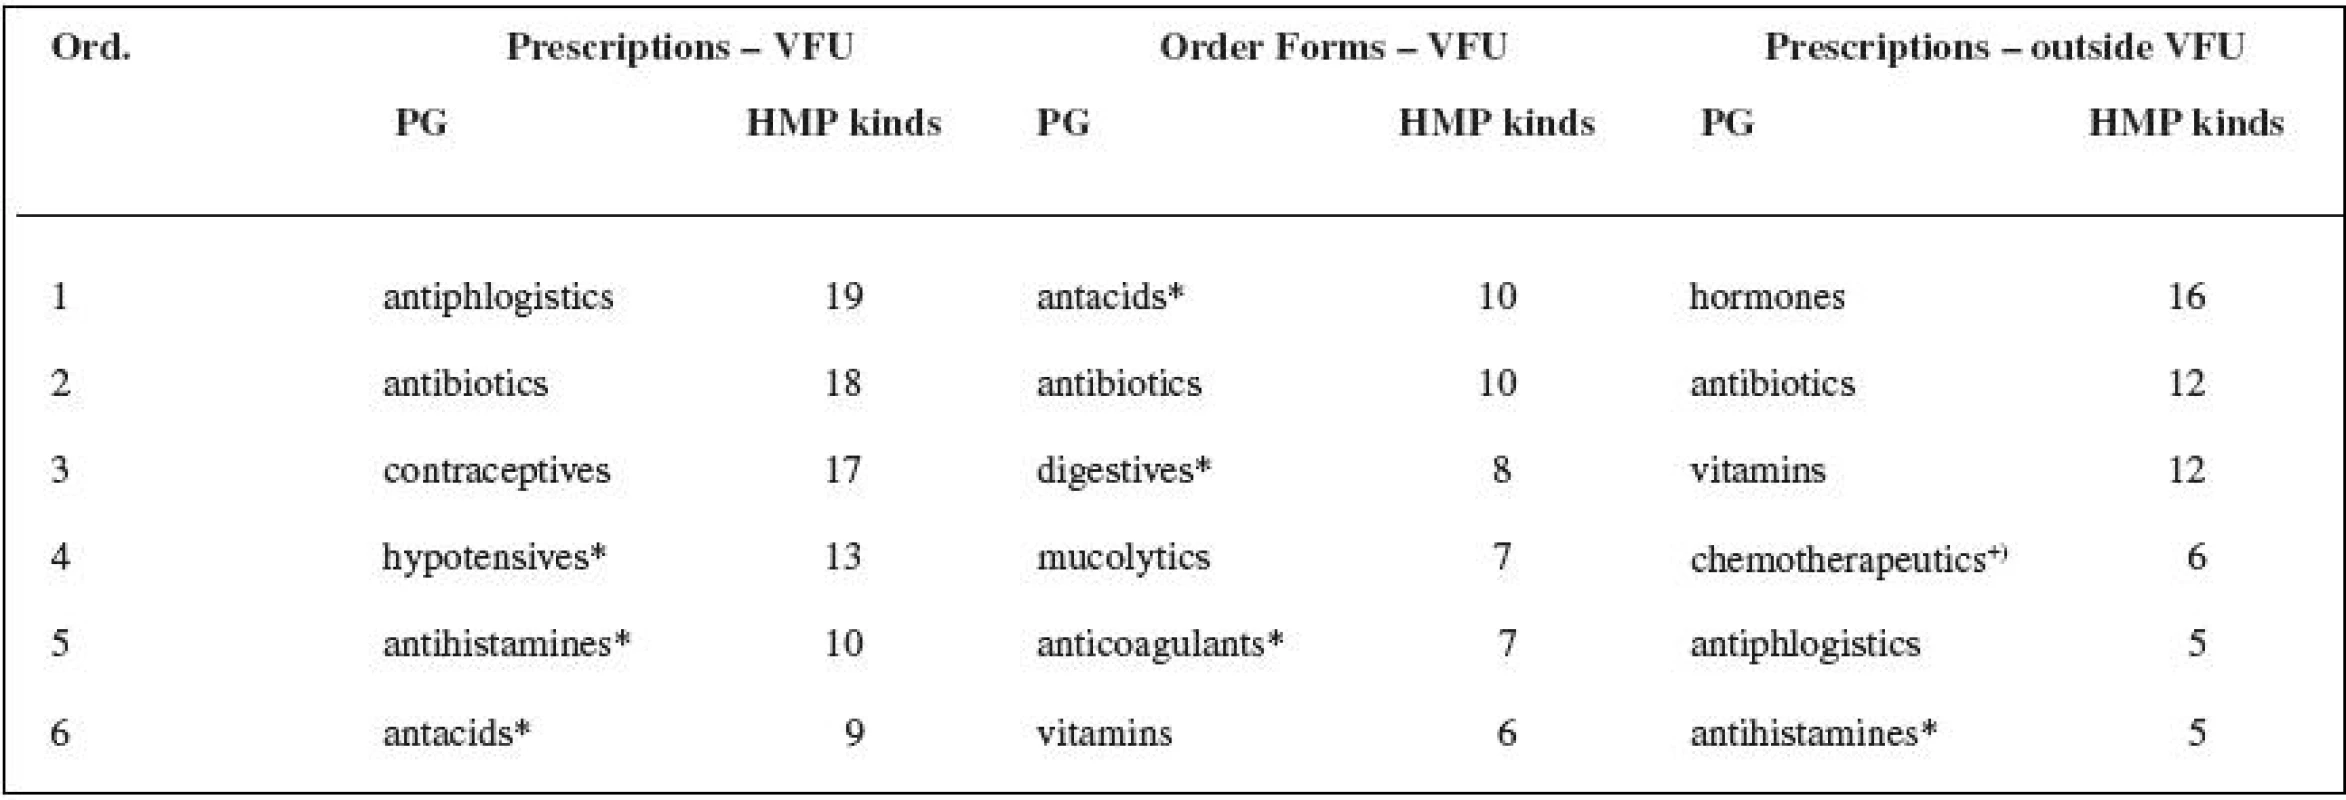 Most frequently prescribed pharmacotherapeutic groups (PG) of HMPs in veterinary medicine